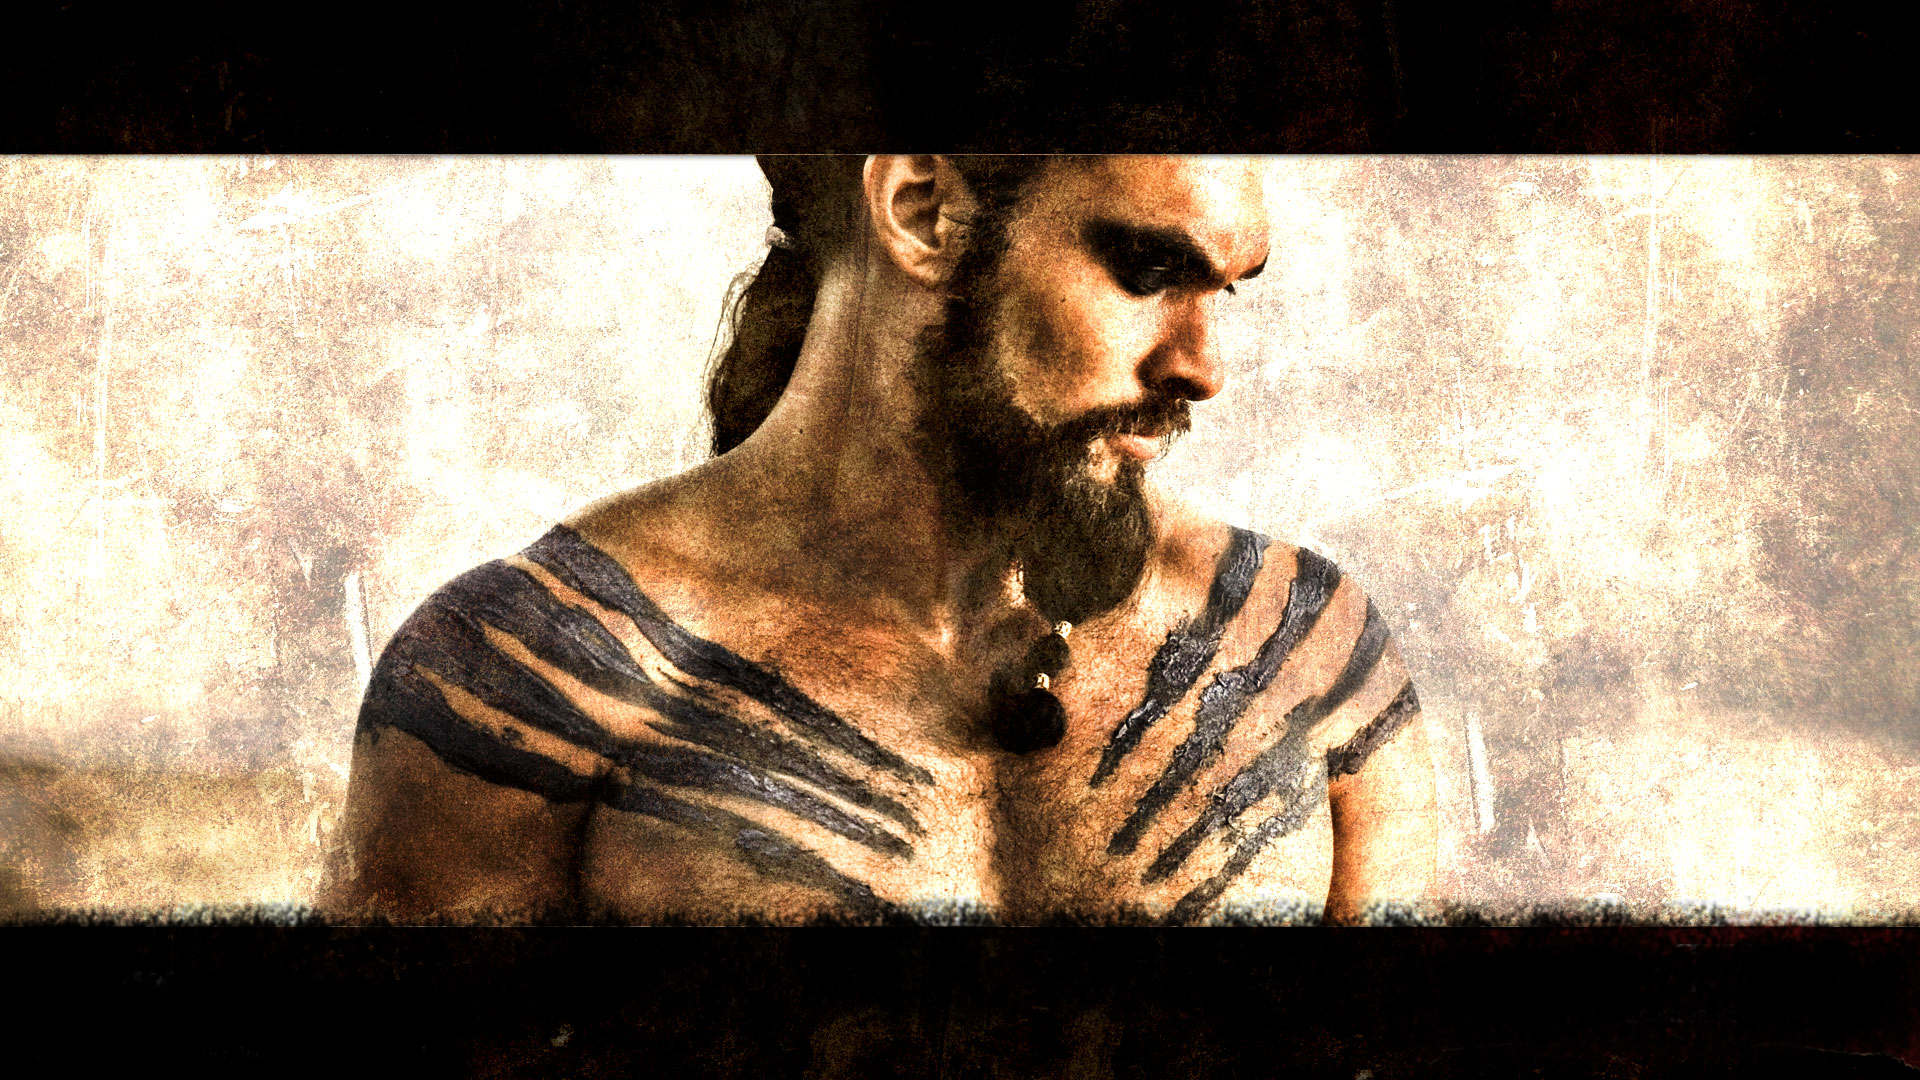 Khal Drogo from Game of Thrones, portrayed by Jason Momoa.